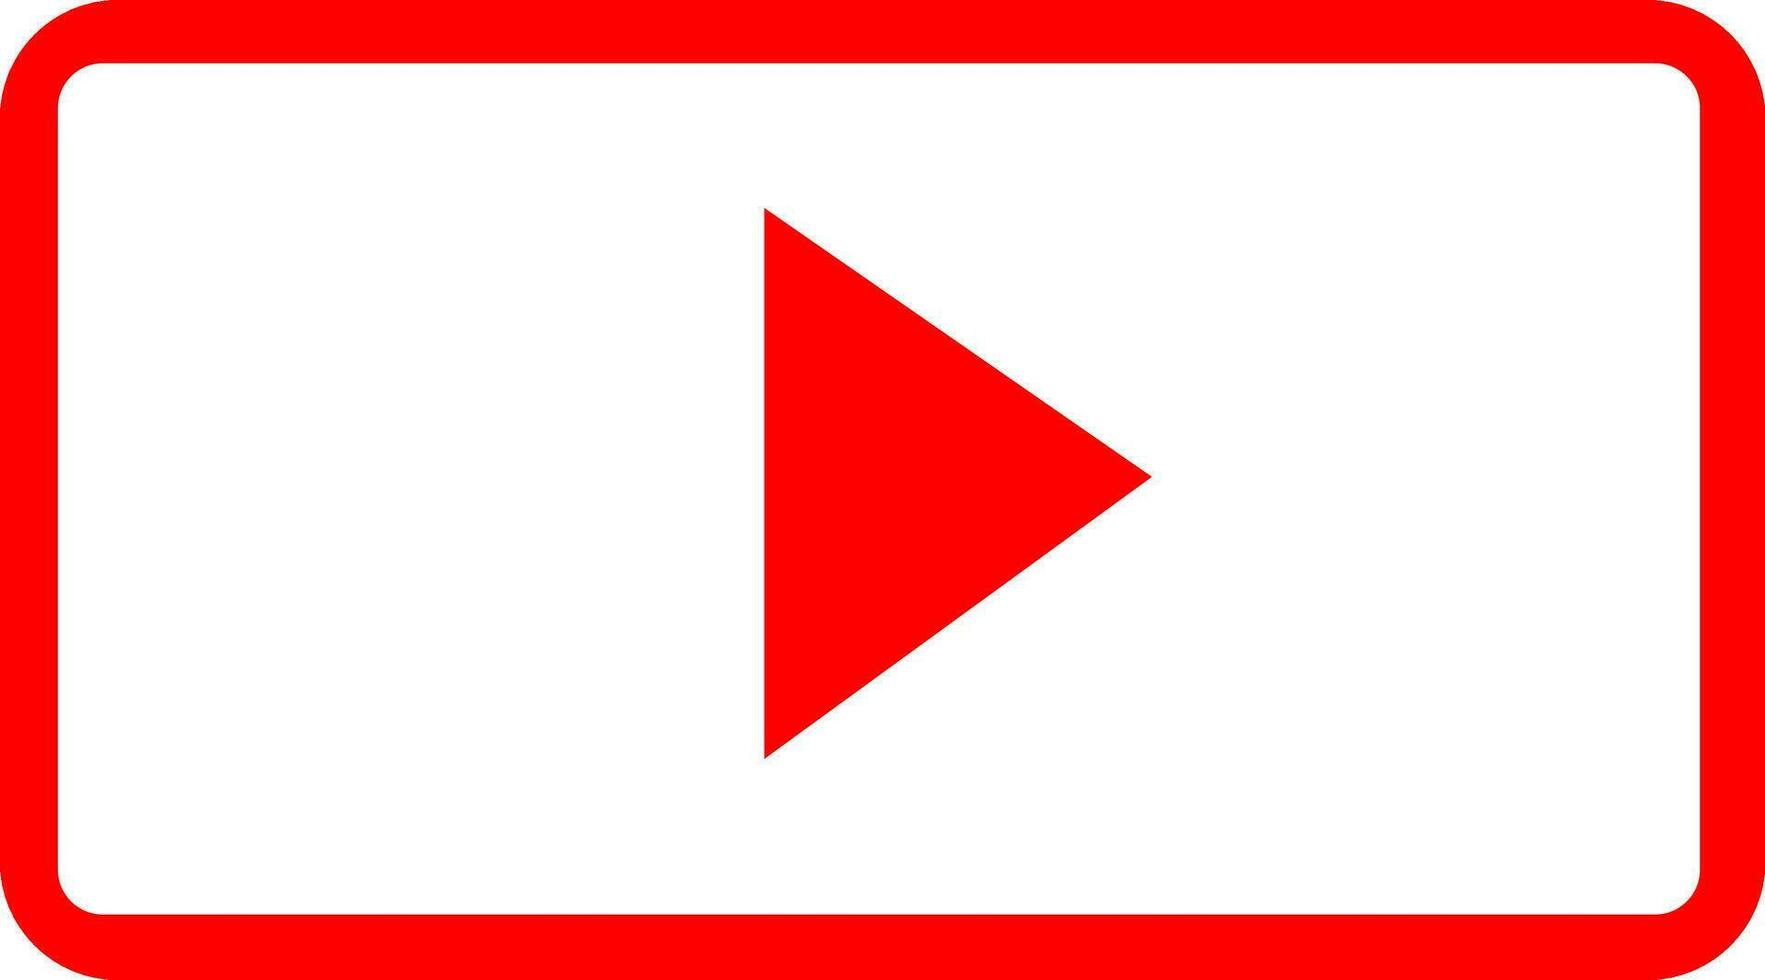 Live video streaming play button rectangular shape vector